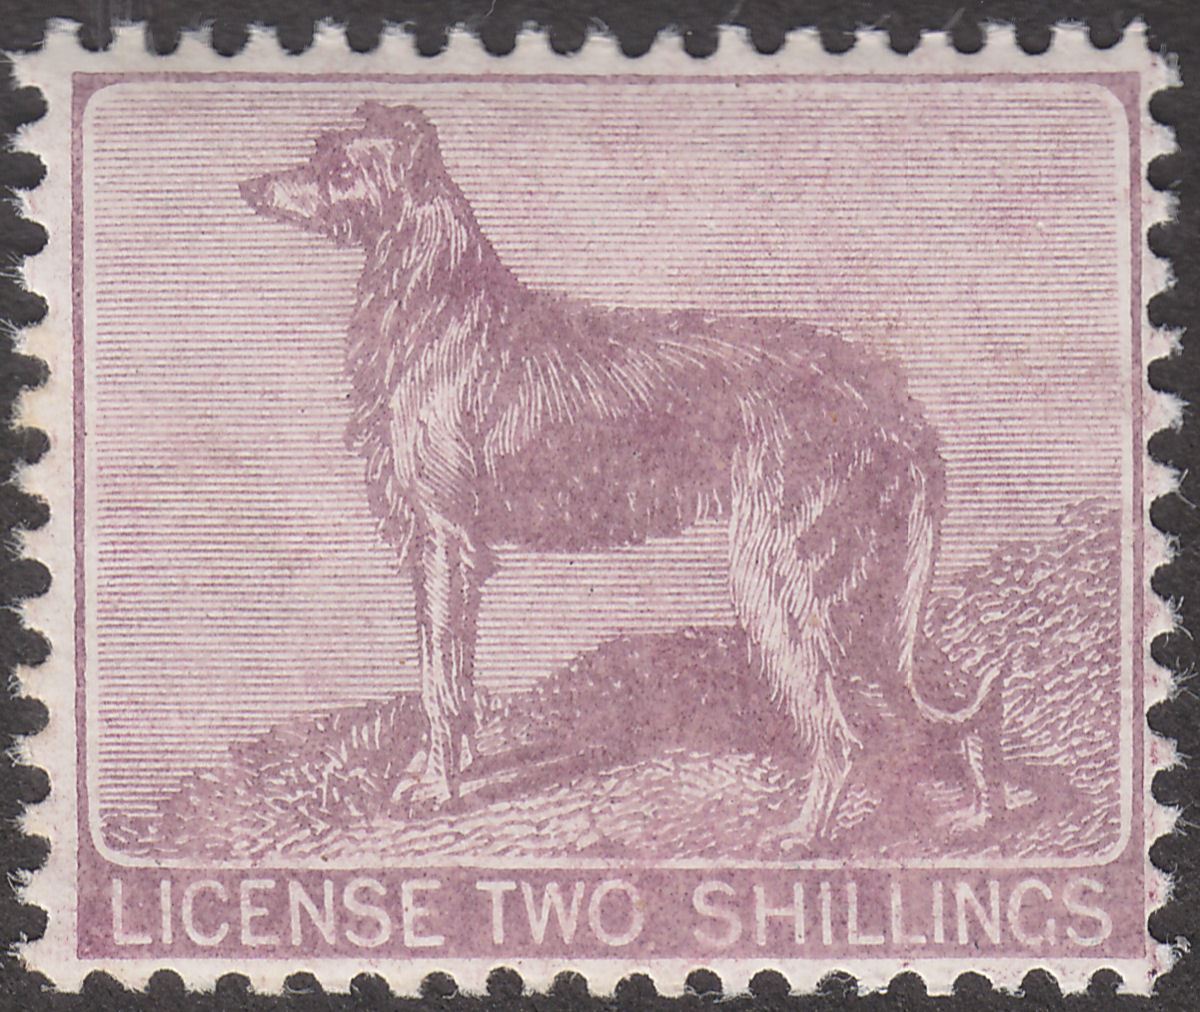 Ireland 1905 KEVII Revenue Dog Licence 2sh Lilac perf 14 Chalky Paper Mint BF4a